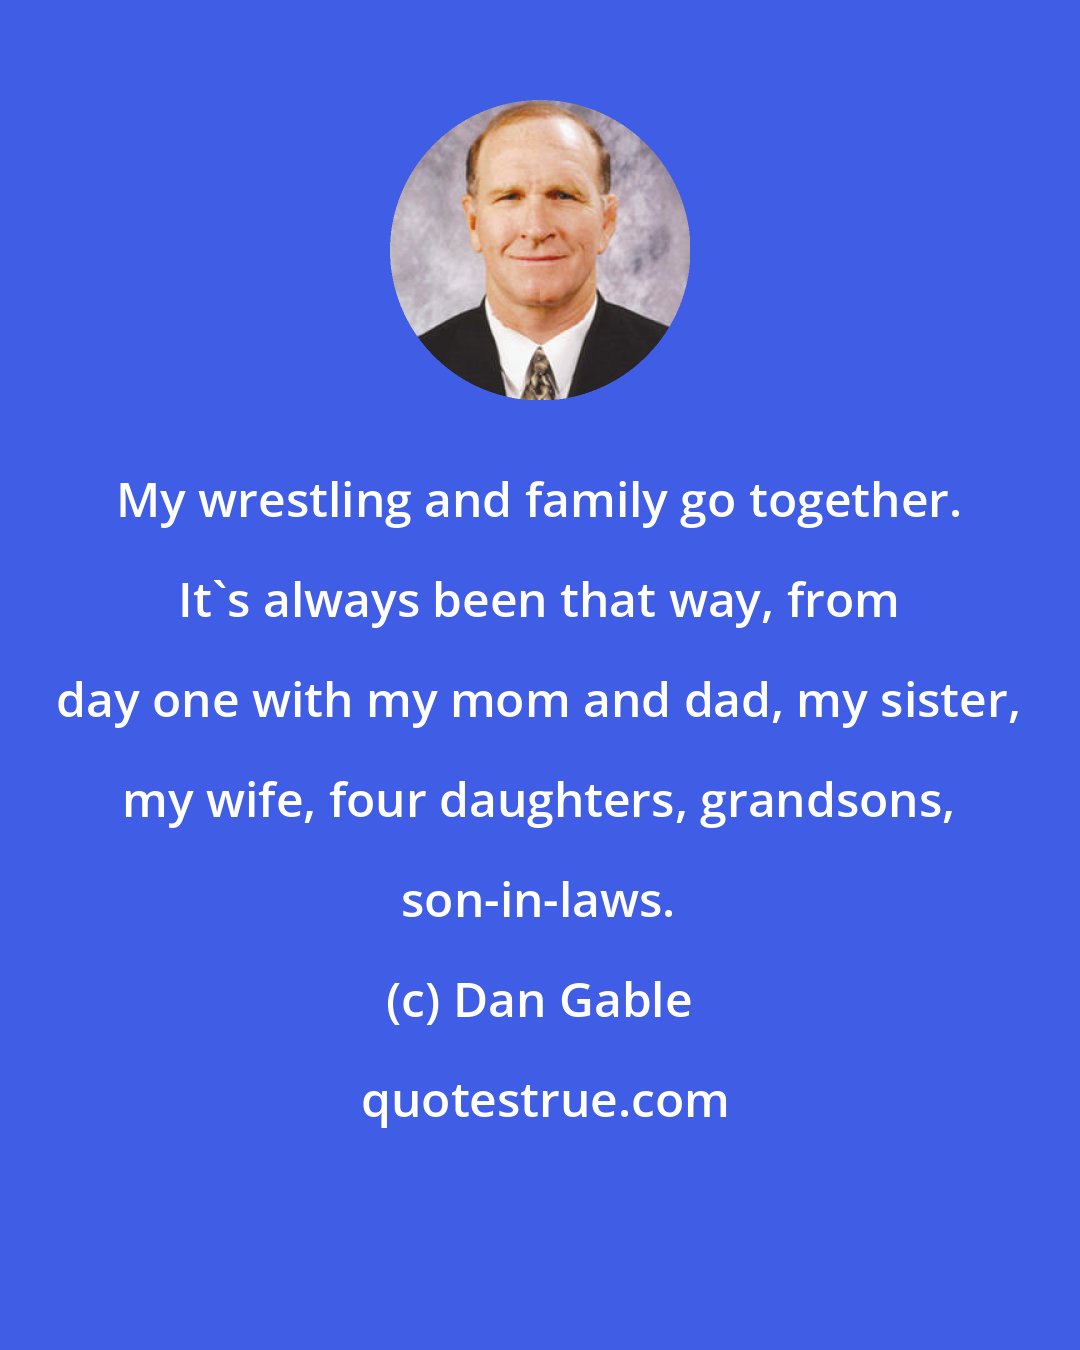 Dan Gable: My wrestling and family go together. It's always been that way, from day one with my mom and dad, my sister, my wife, four daughters, grandsons, son-in-laws.